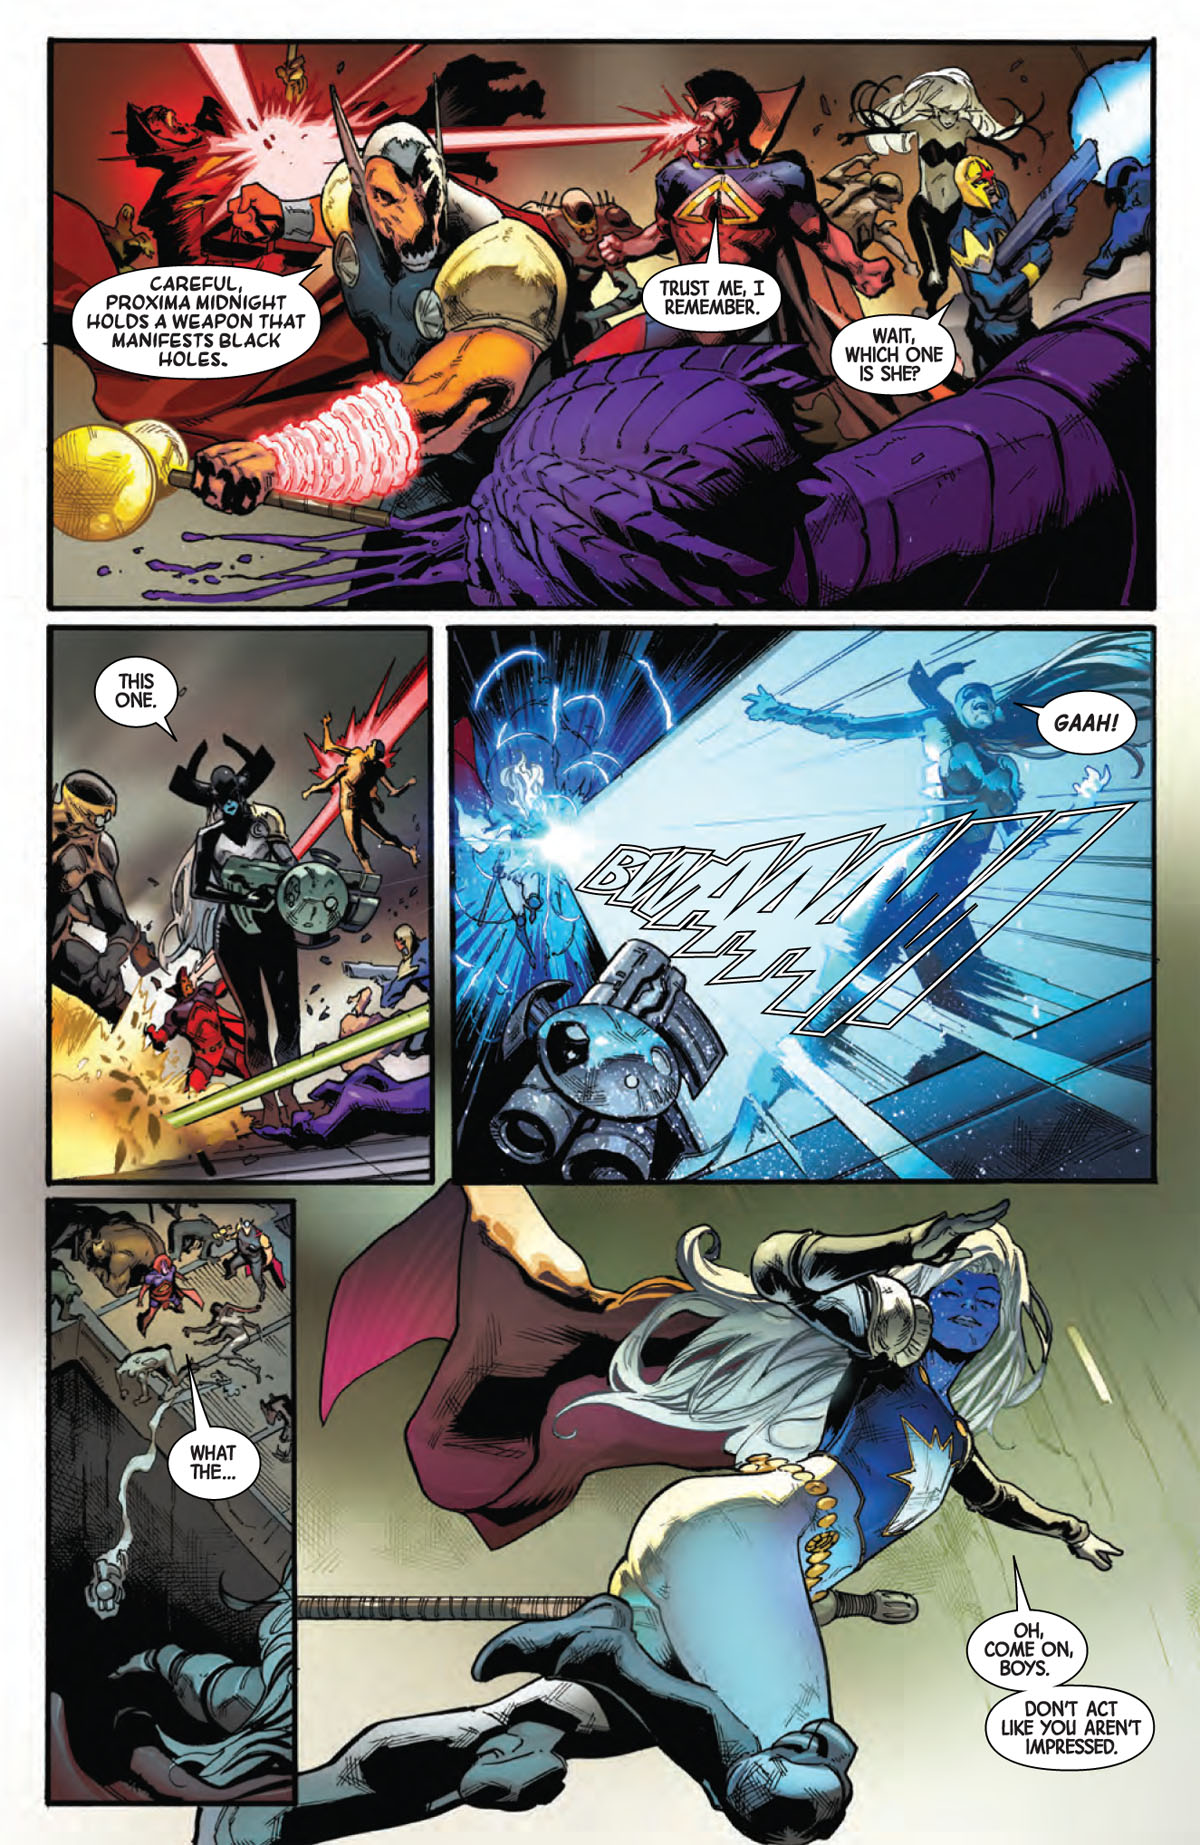 Guardians of the Galaxy #6 page 5